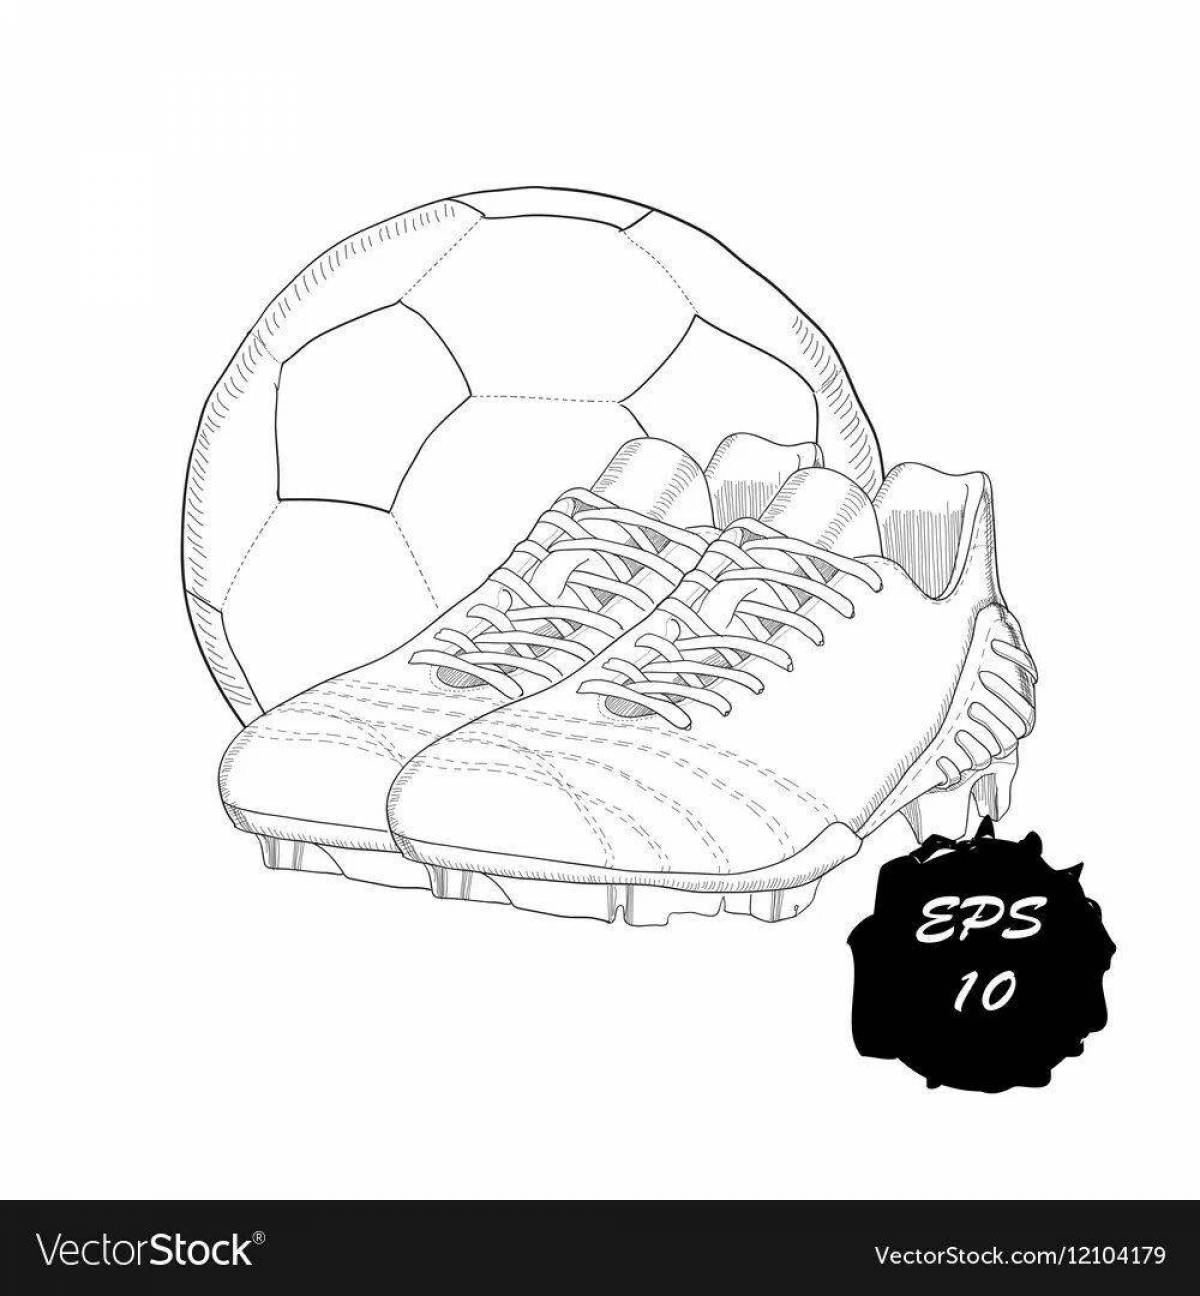 Coloring page of intricate football boots